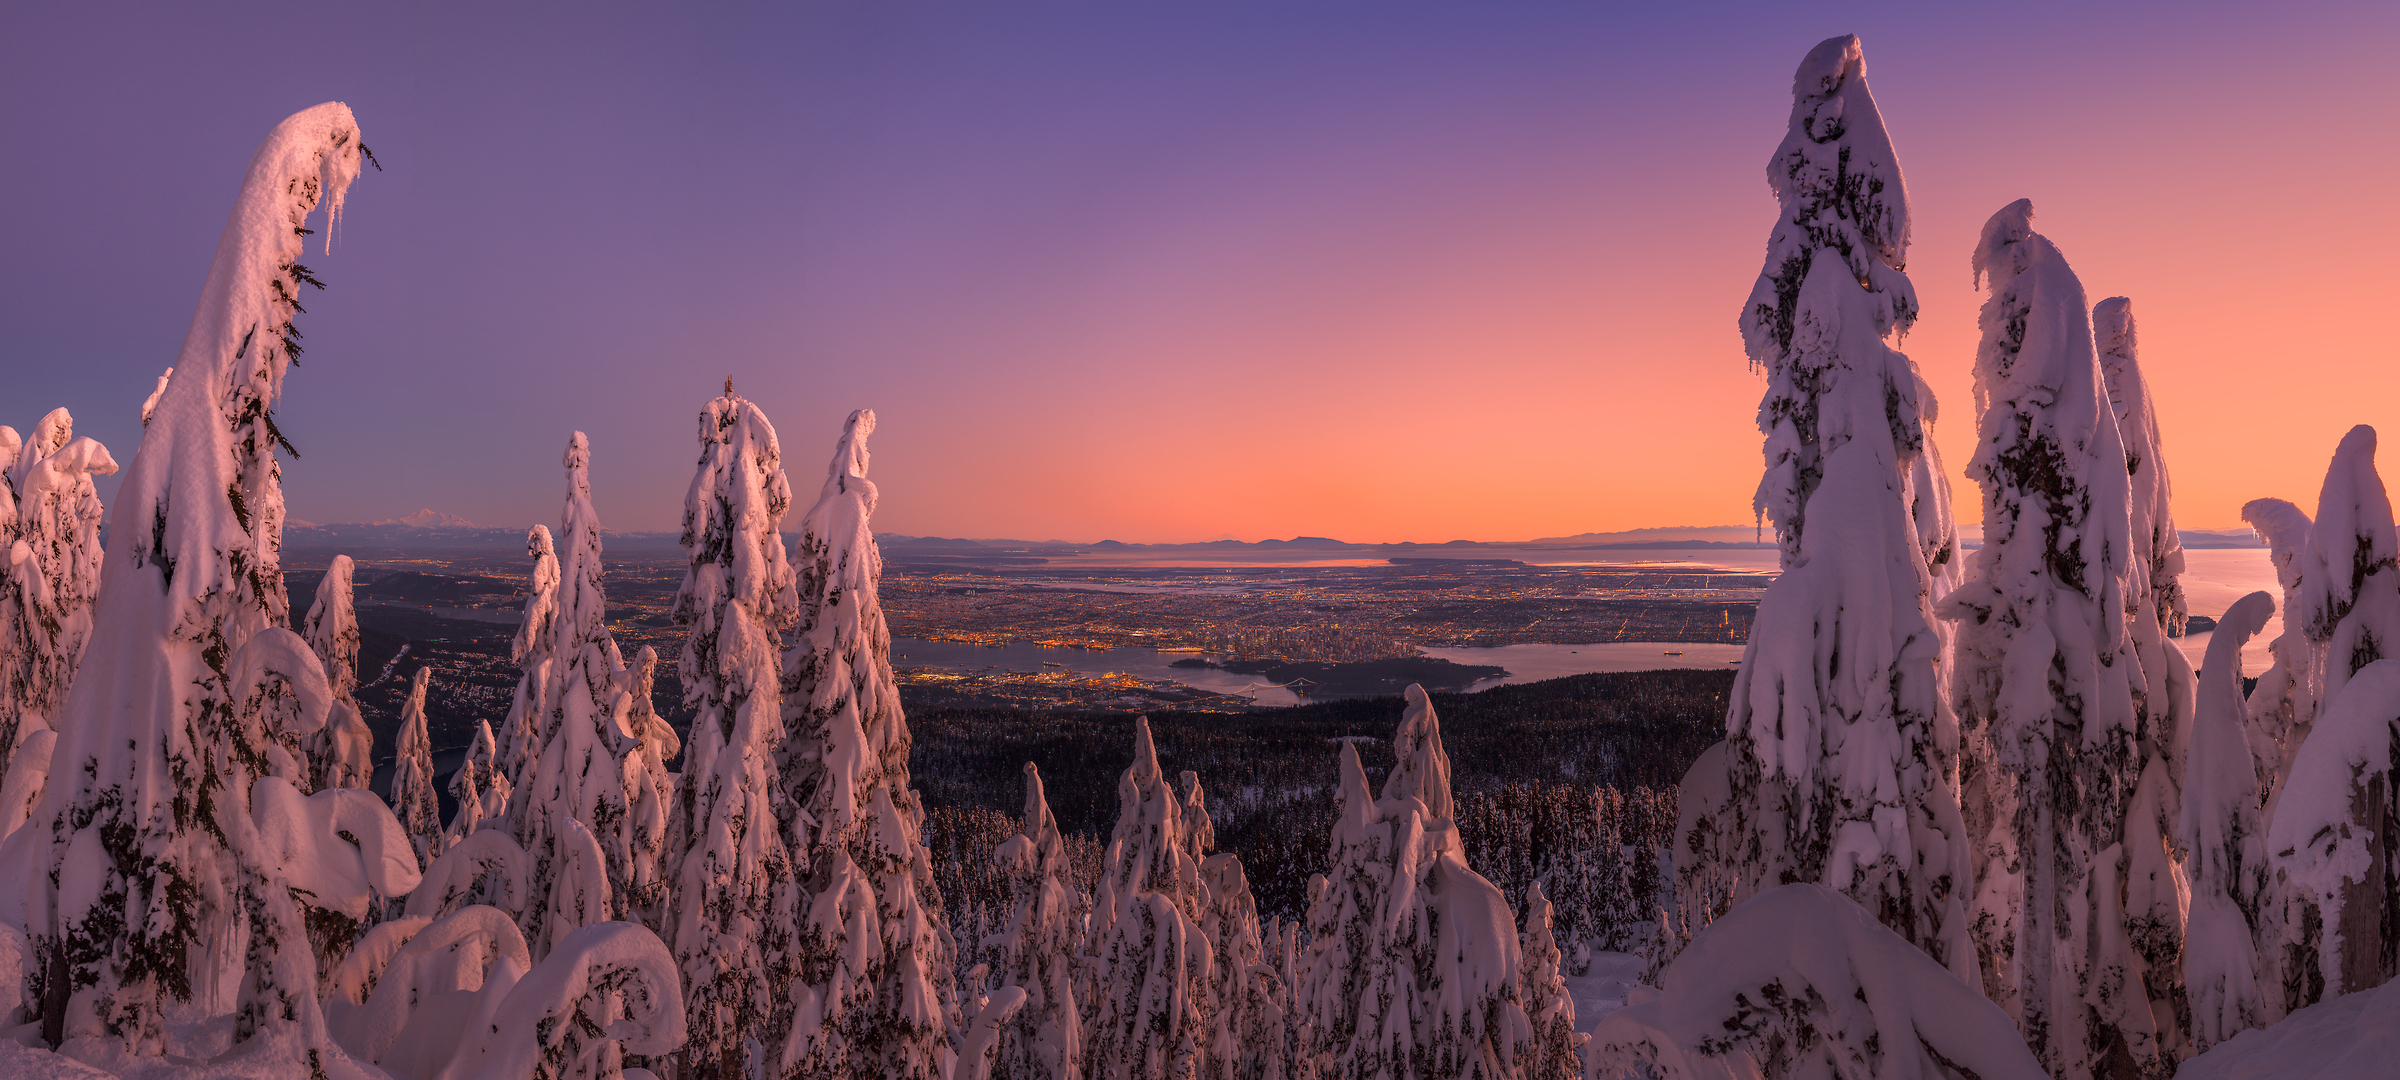 443 megapixels! A very high resolution, large-format VAST photo print of snow-covered trees overlooking a city at sunset from Hollyburn Peak; fine art landscape photo created by Chris Collacott in West Vancouver, British Columbia, Canada